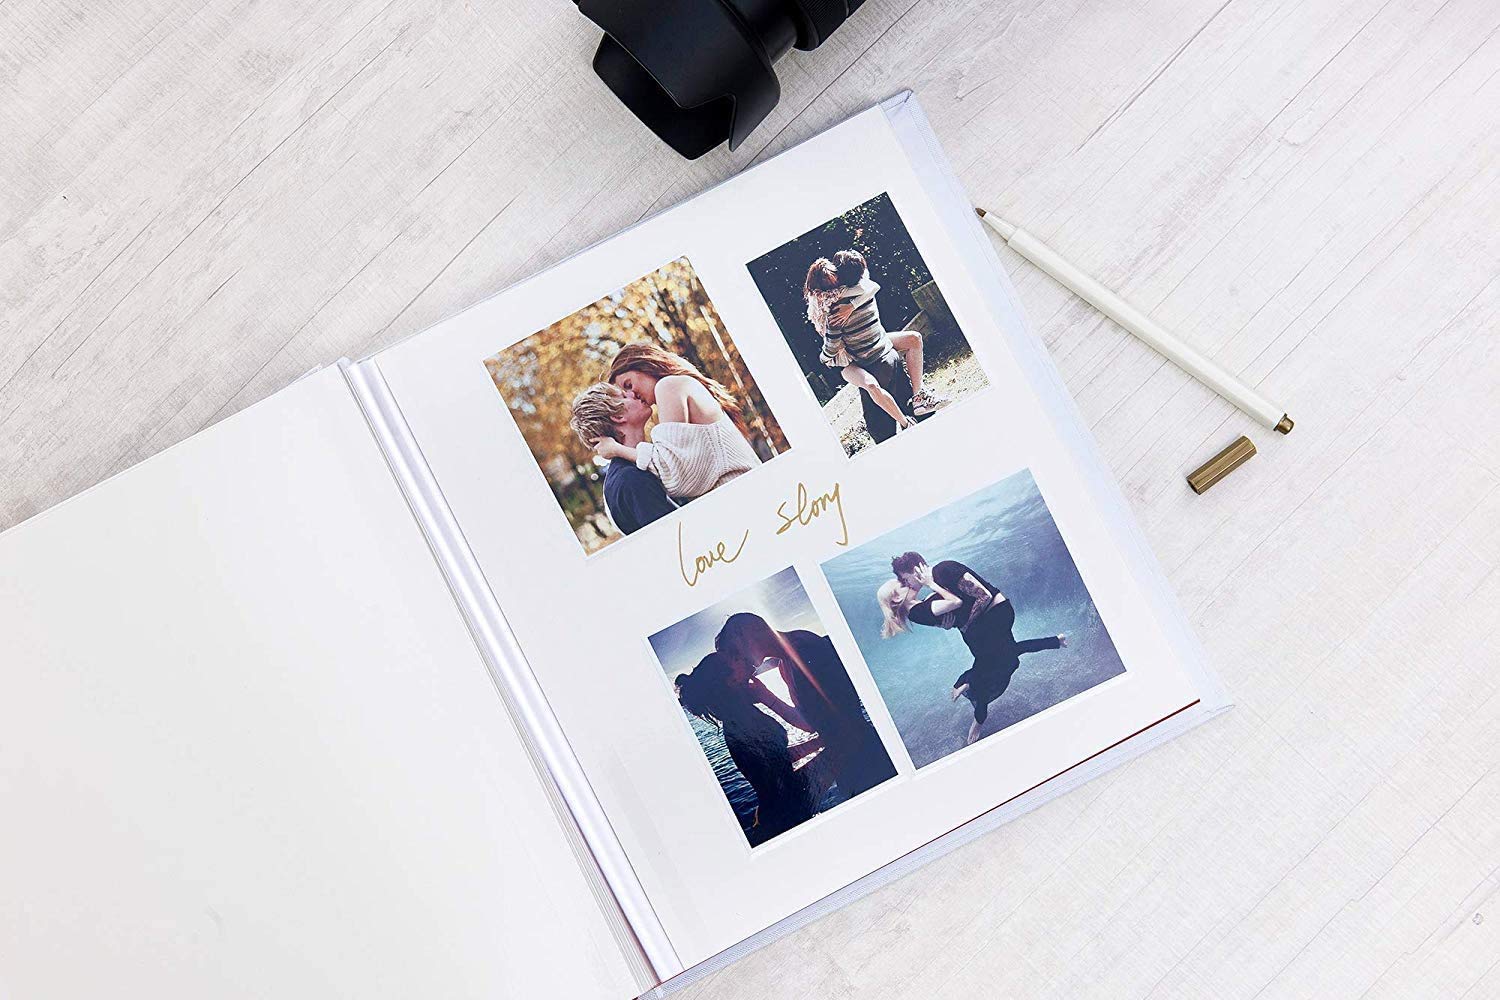 Personalised Large Linen Our Wedding Day Photo Album With Sketched Couple